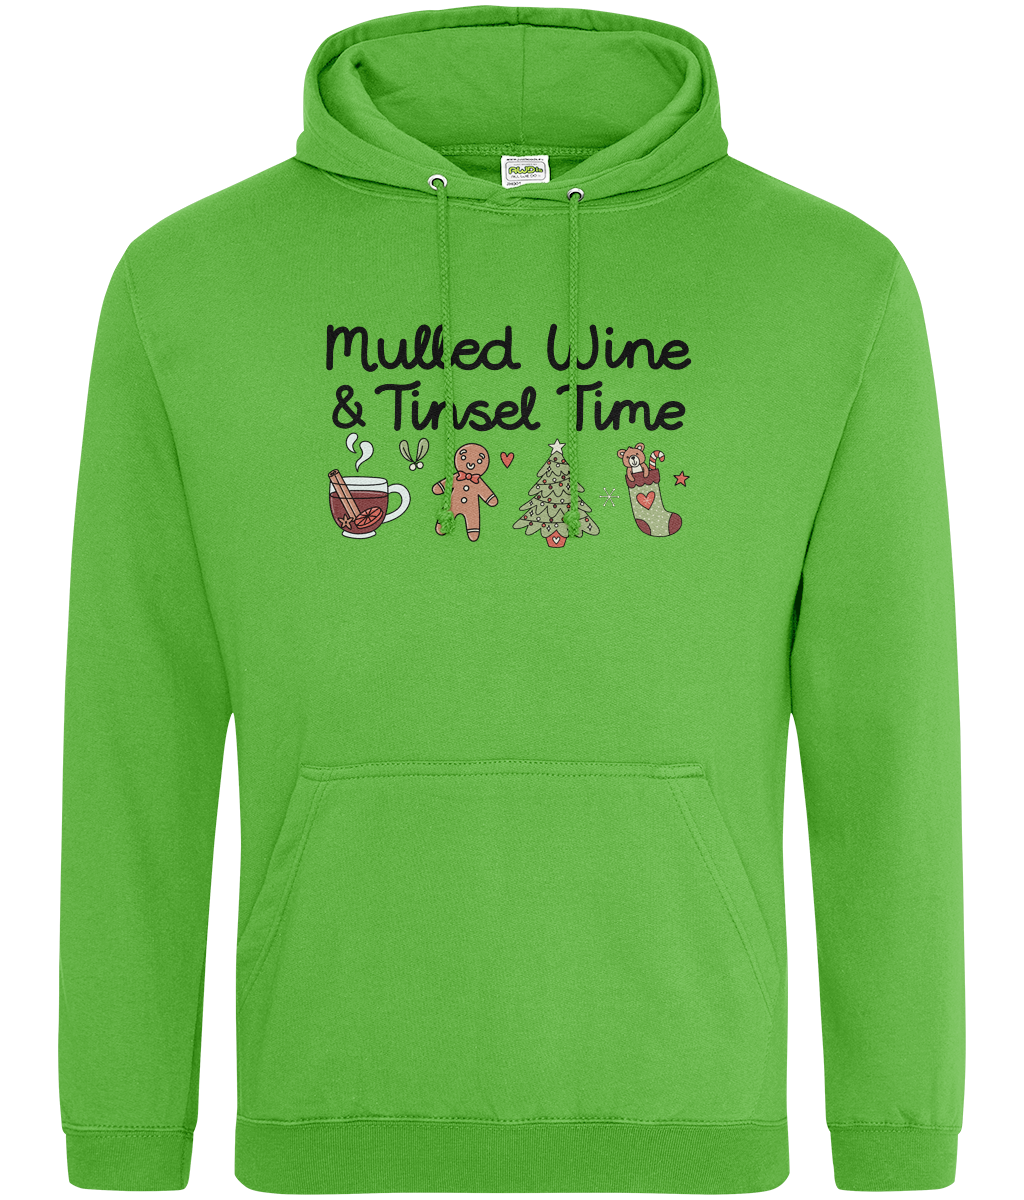 Mulled Wine & Tinsel Time - Adult Hoodie - Multi Colour Available